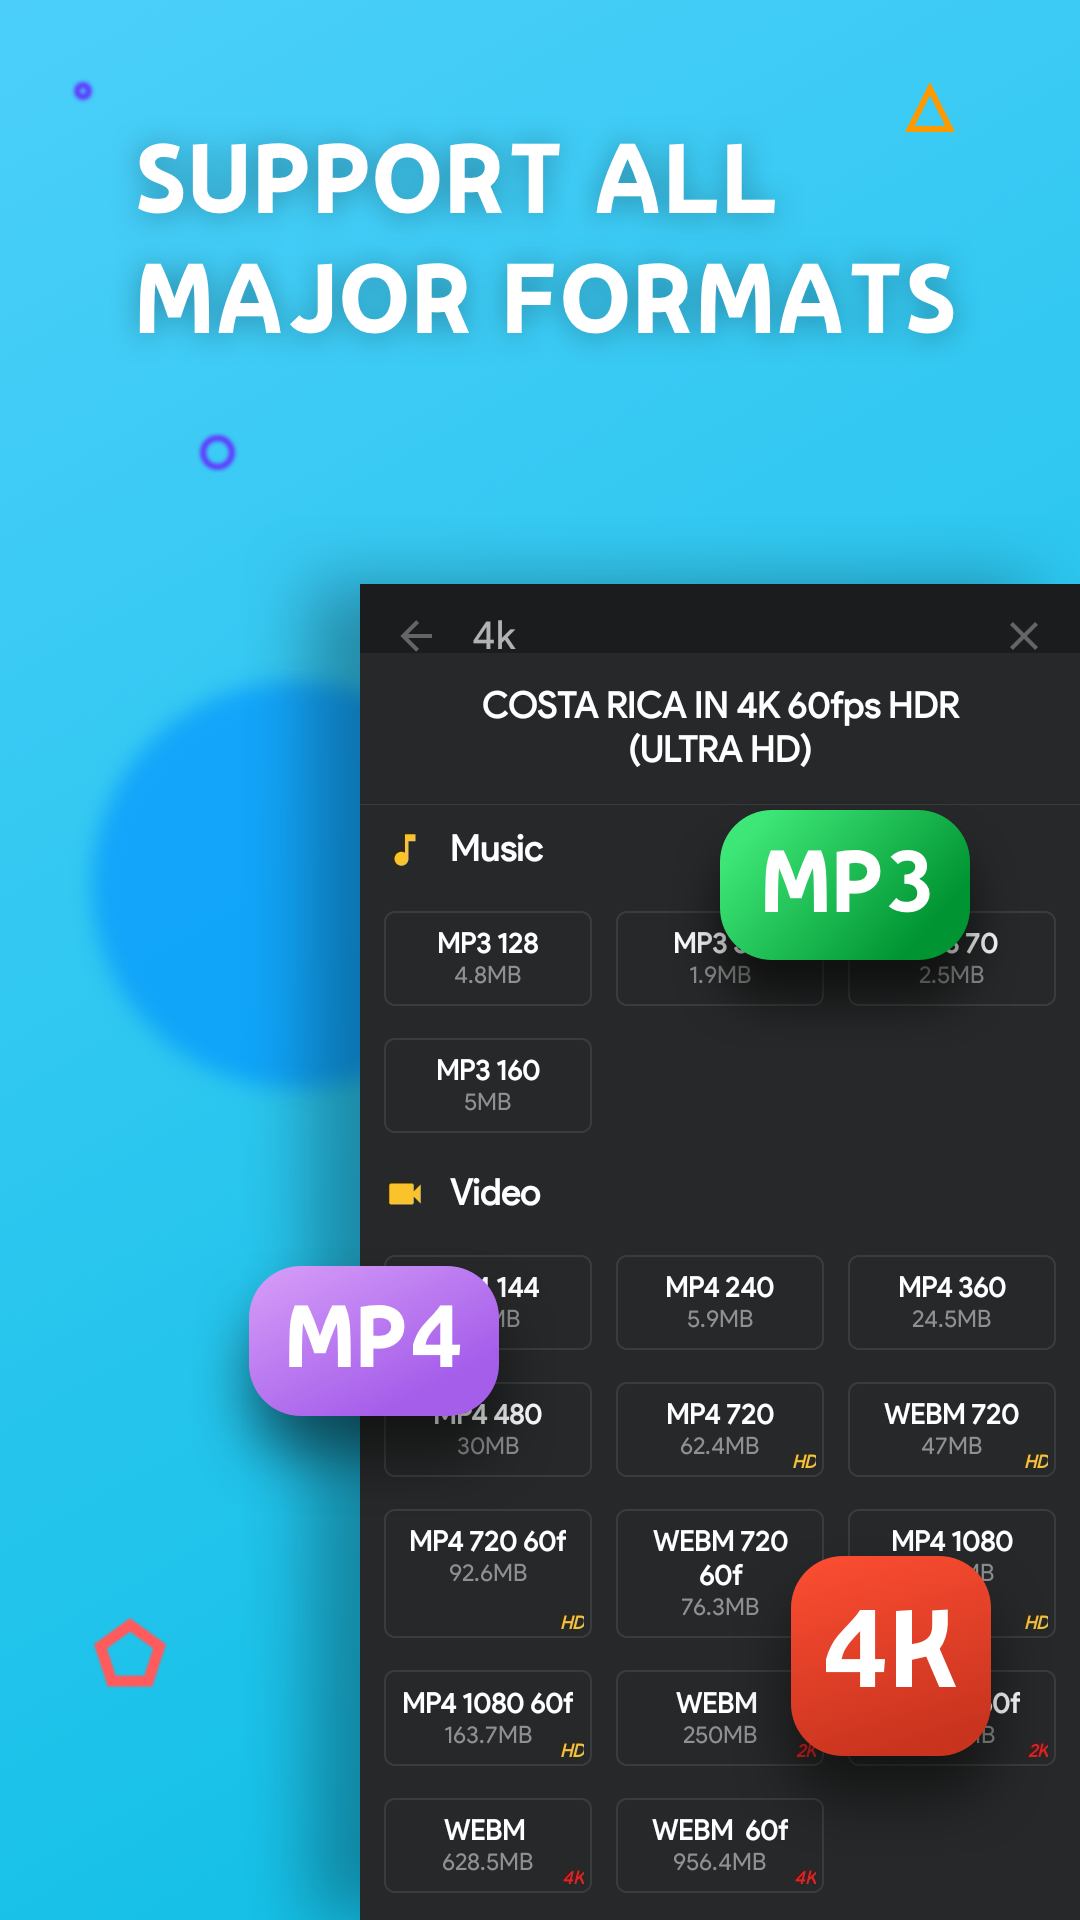 mp3 bitrate converter for android free download